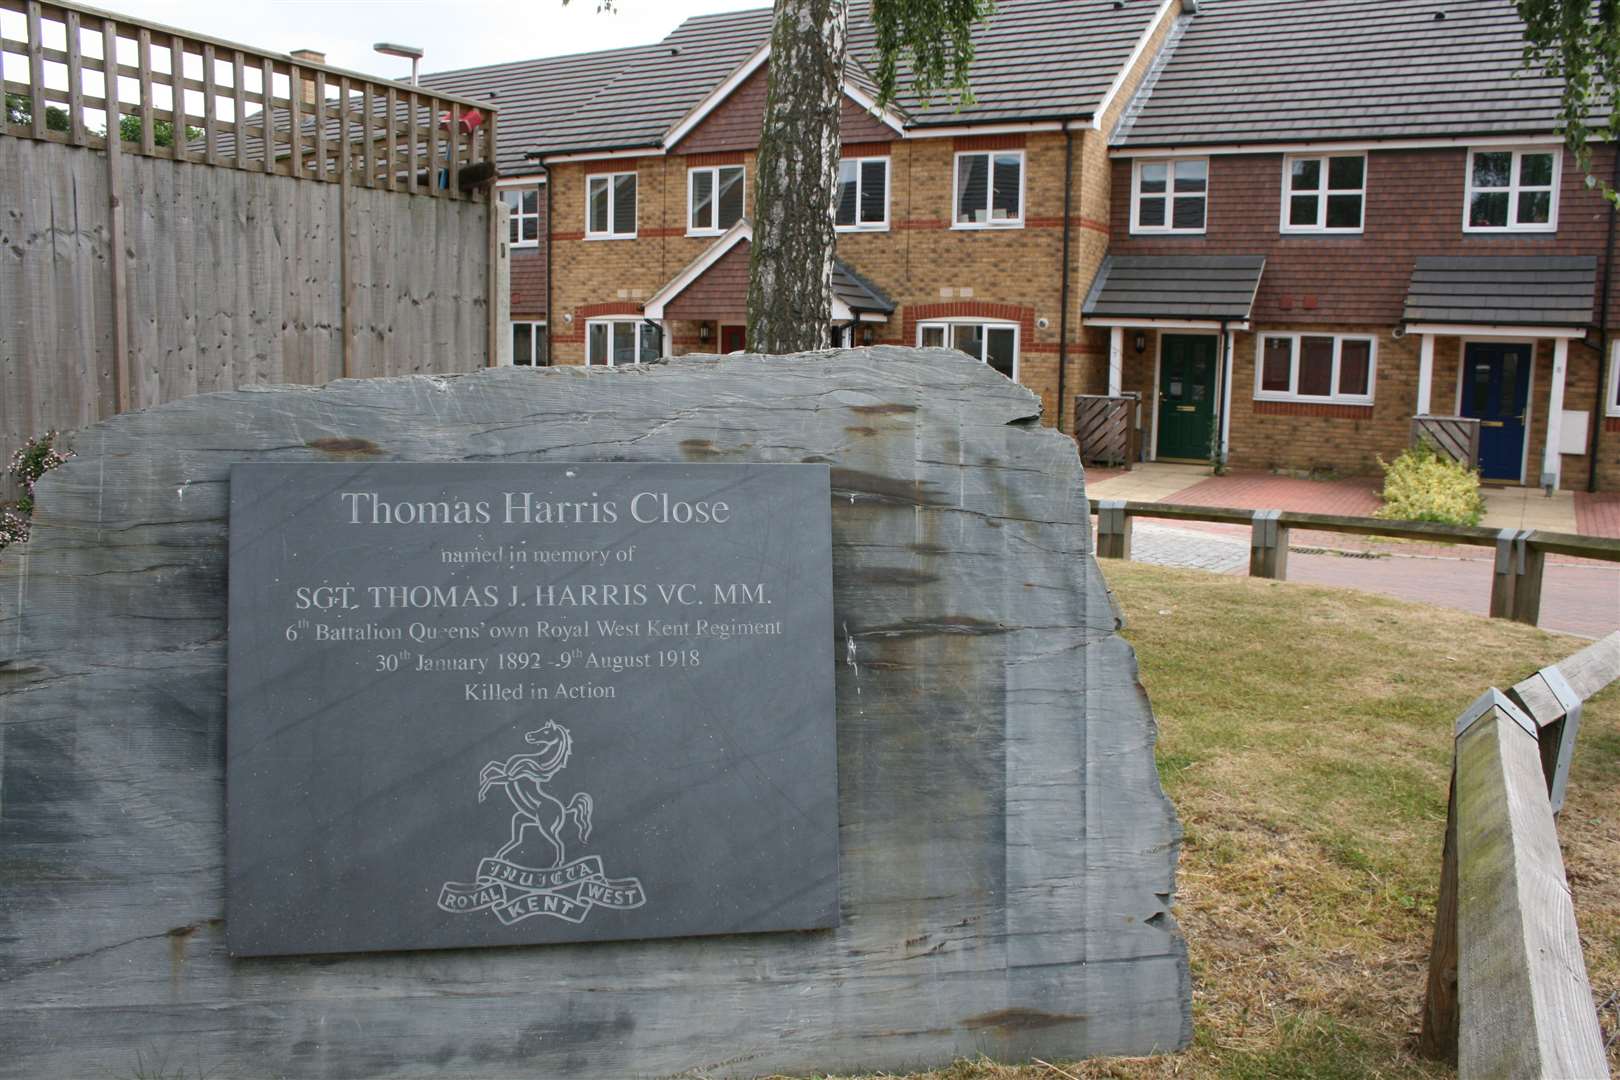 A memorial stone commemorates Halling hero Thomas Harris in the road which bears his name